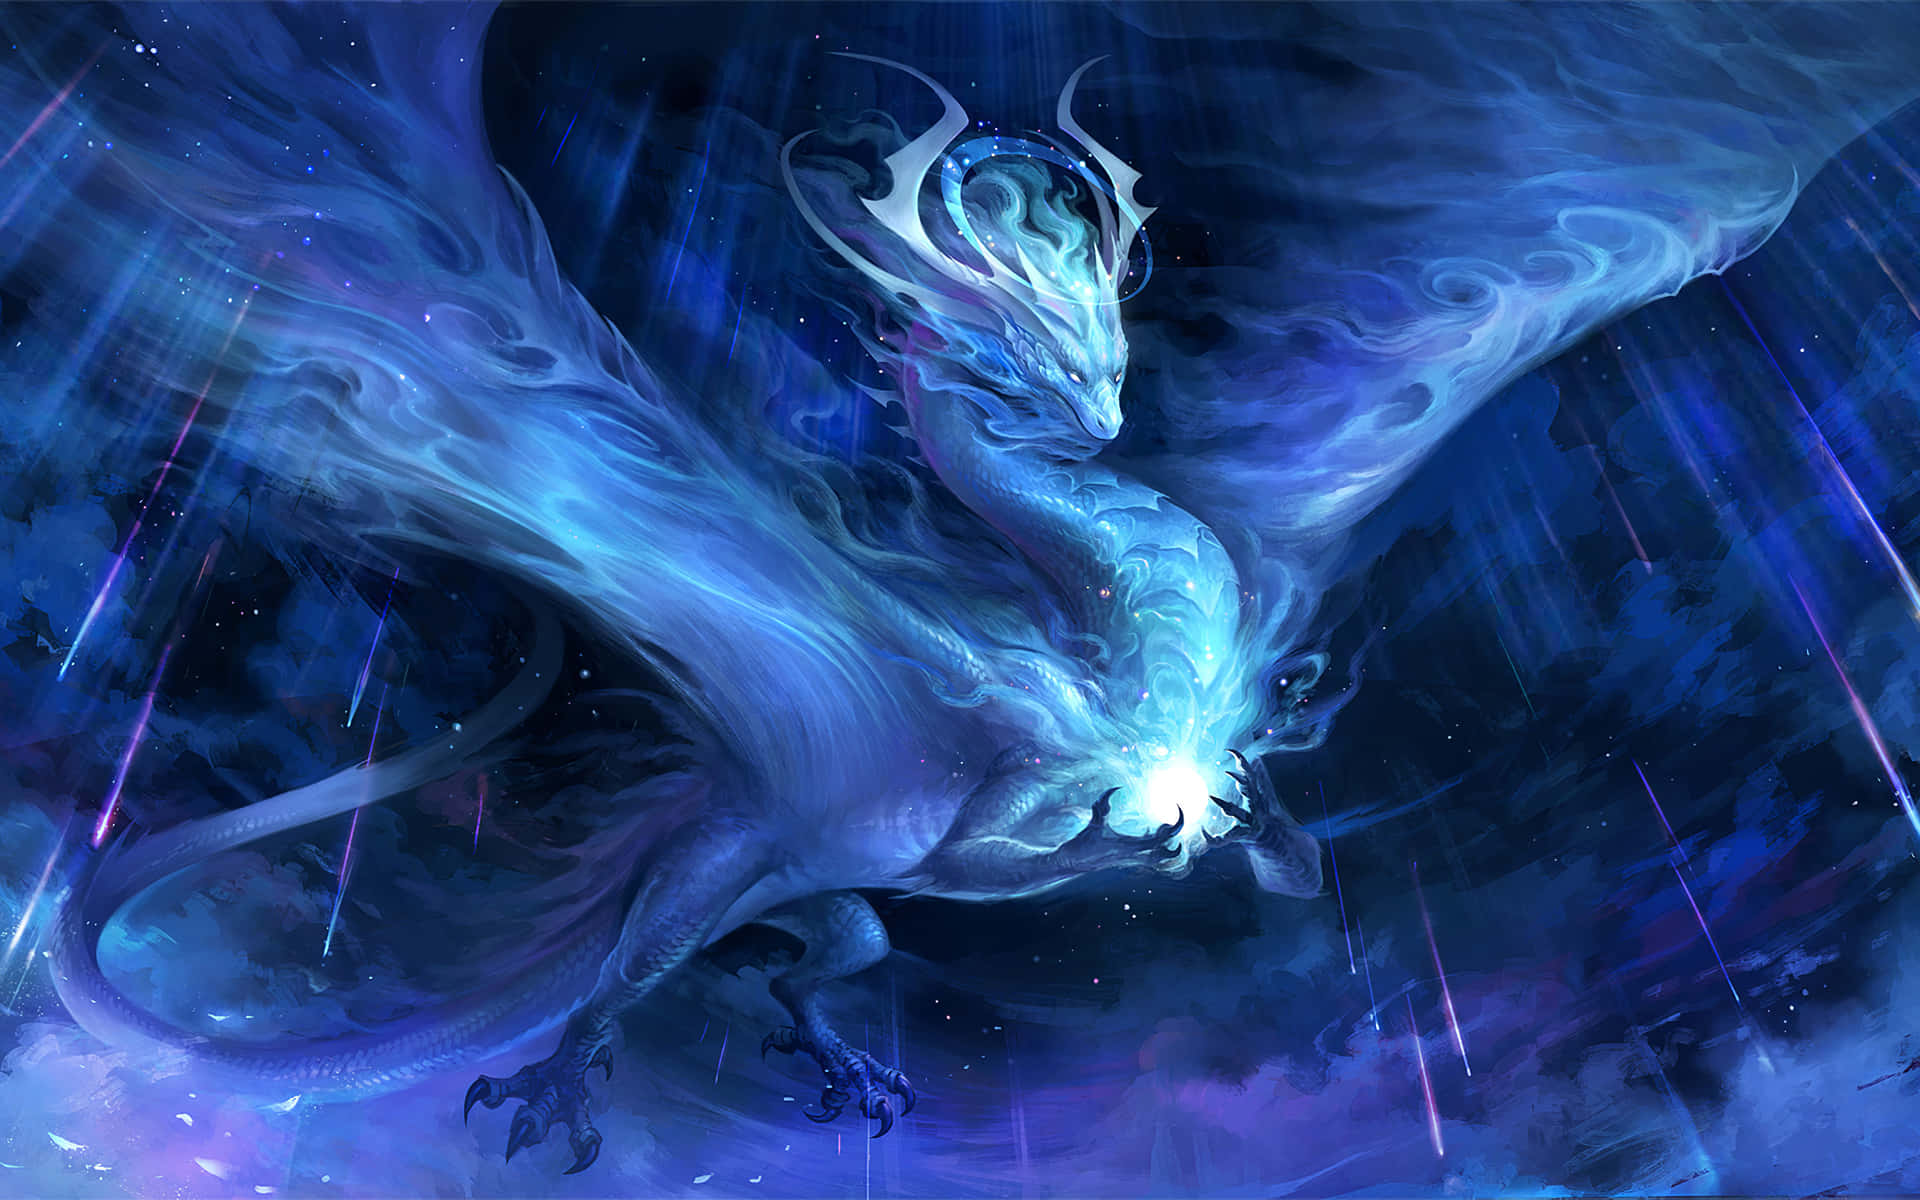 "Behold! The Mystical Dragon" Wallpaper